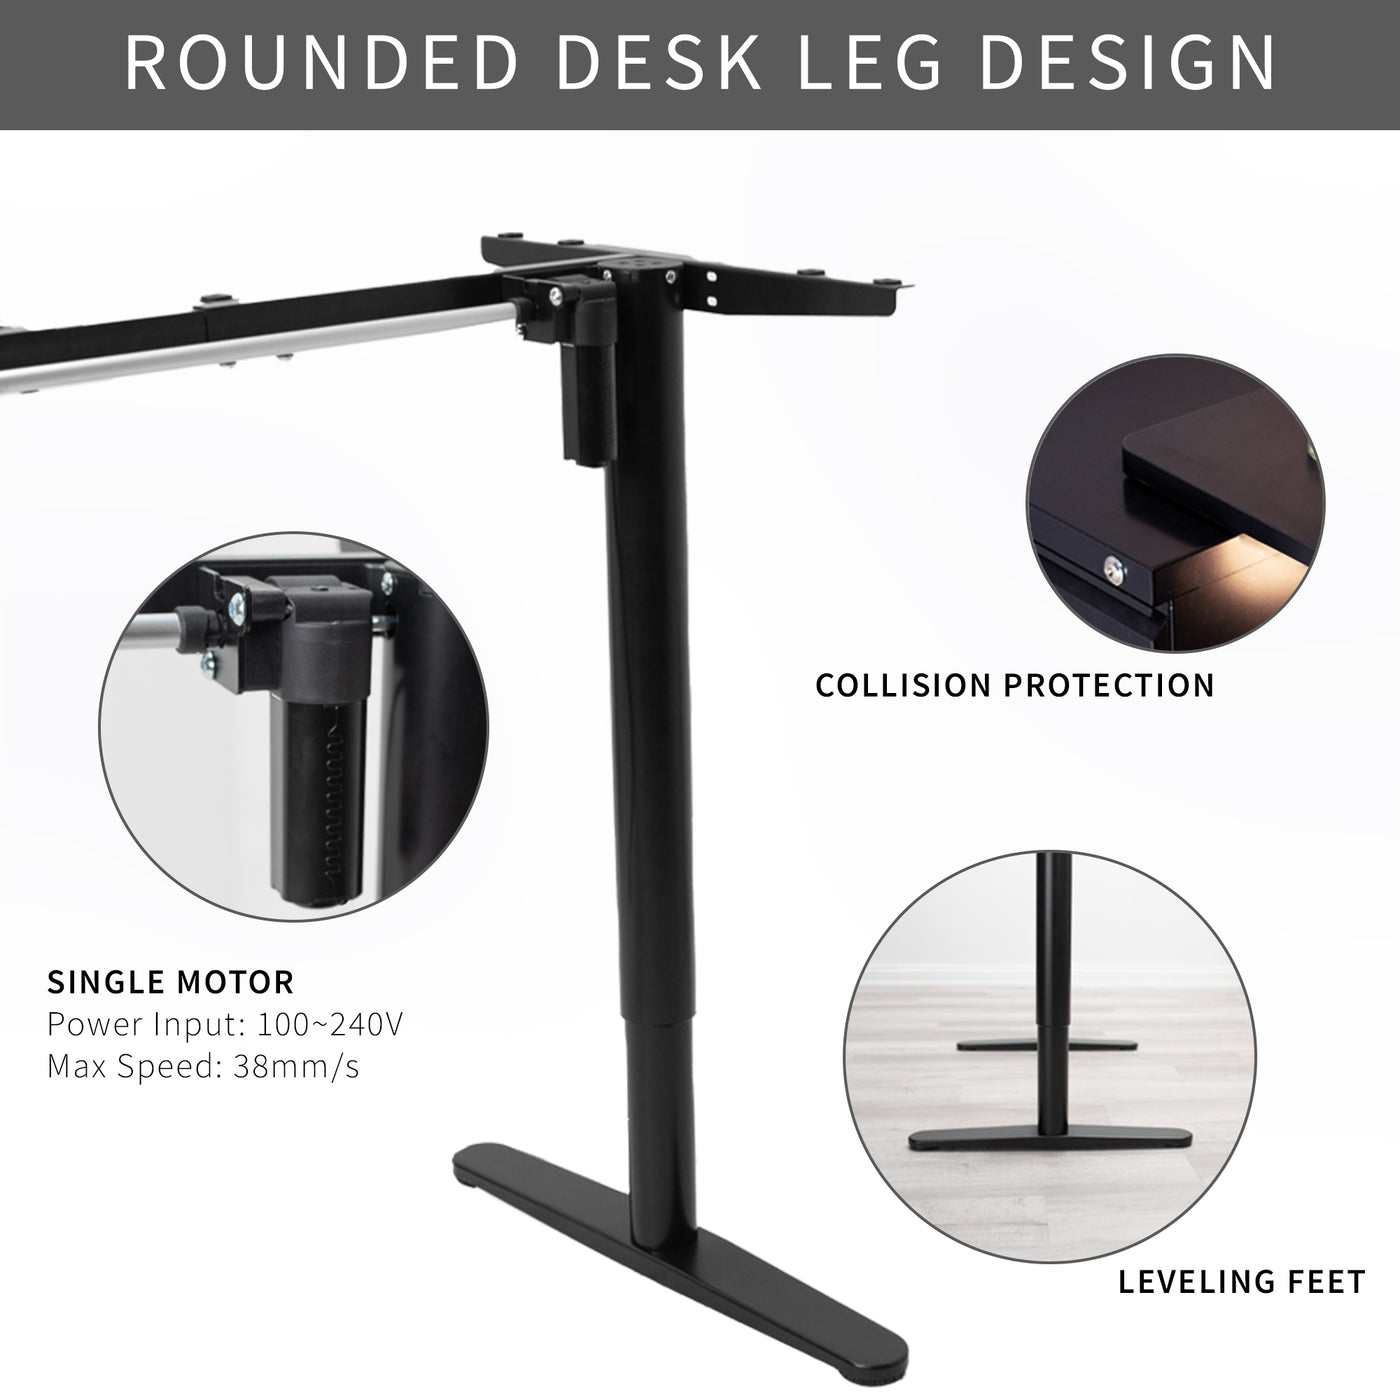 Advanced desk frame design with collision detection, two-tier leg support, and powerful motor.